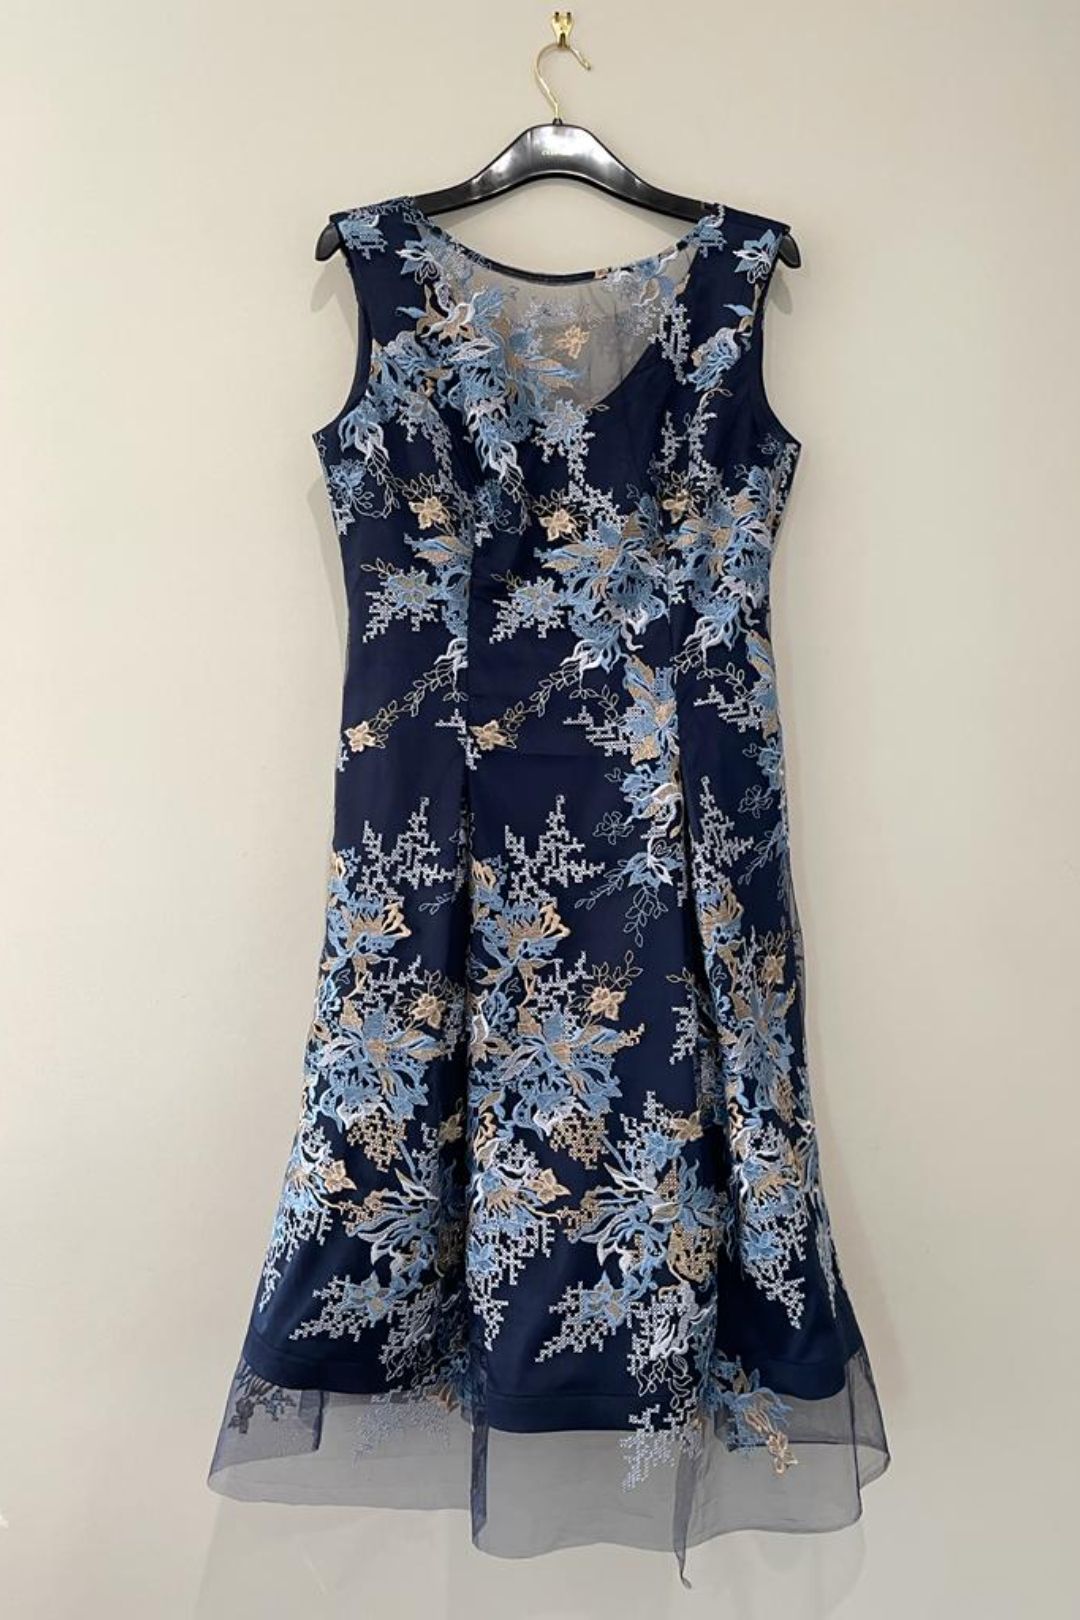 Blue Floral Embroidered Ophelia A-Line Dress